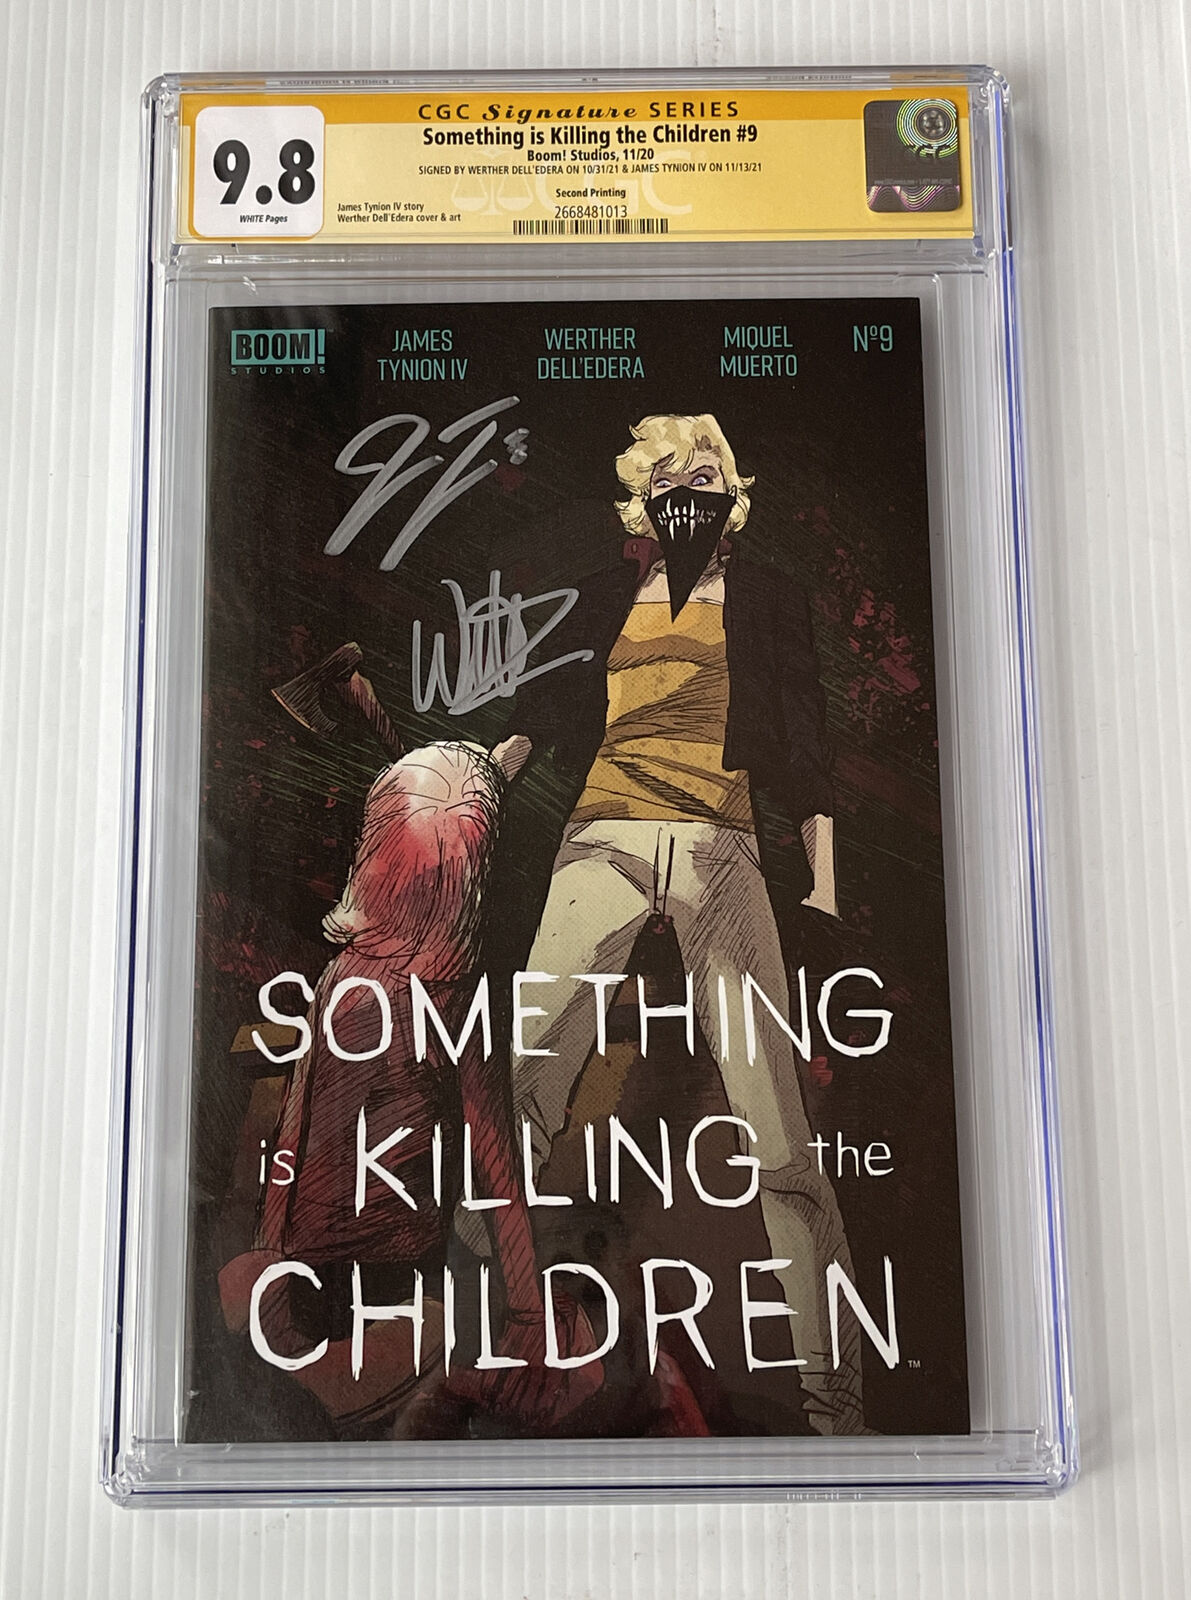 James Tynion Dell’edera Signed X2 Something is Killing the Children #9 CGC 9.8